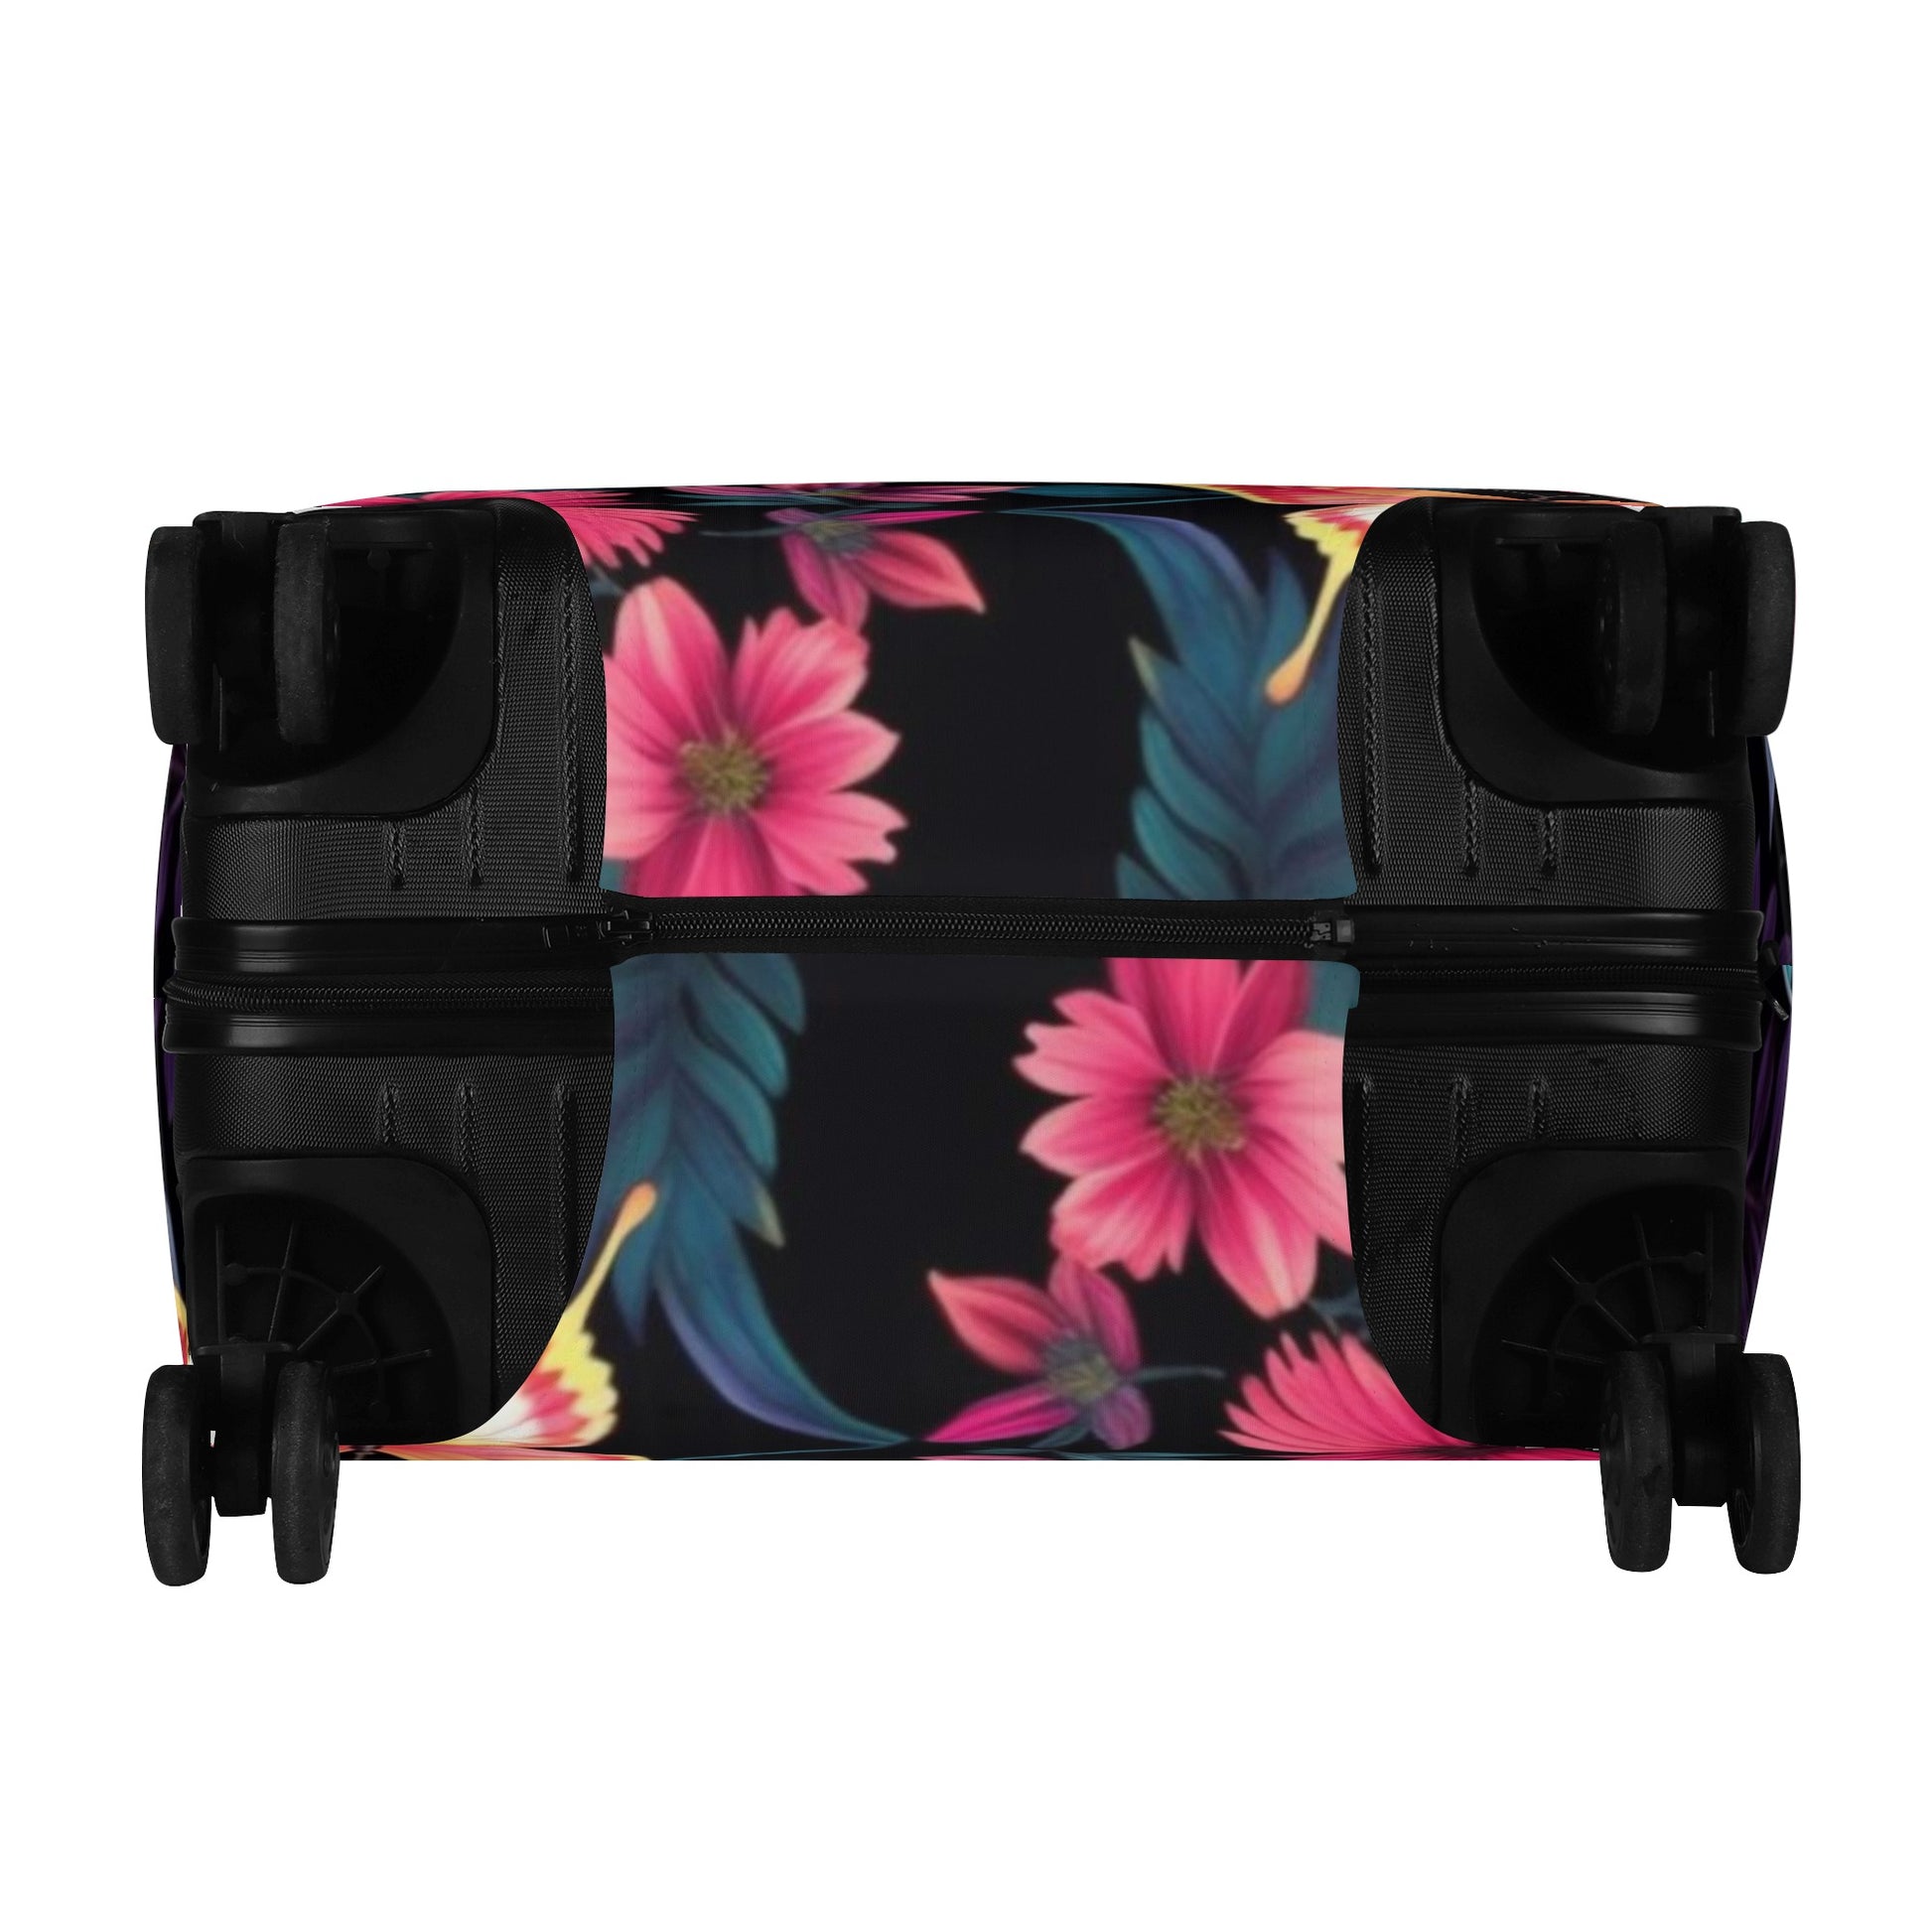 Butterfly Luggage Cover, Tropical Suitcase Protector Hard Carry On Bag Washable Wrap Large Small Travel Aesthetic Sleeve Starcove Fashion